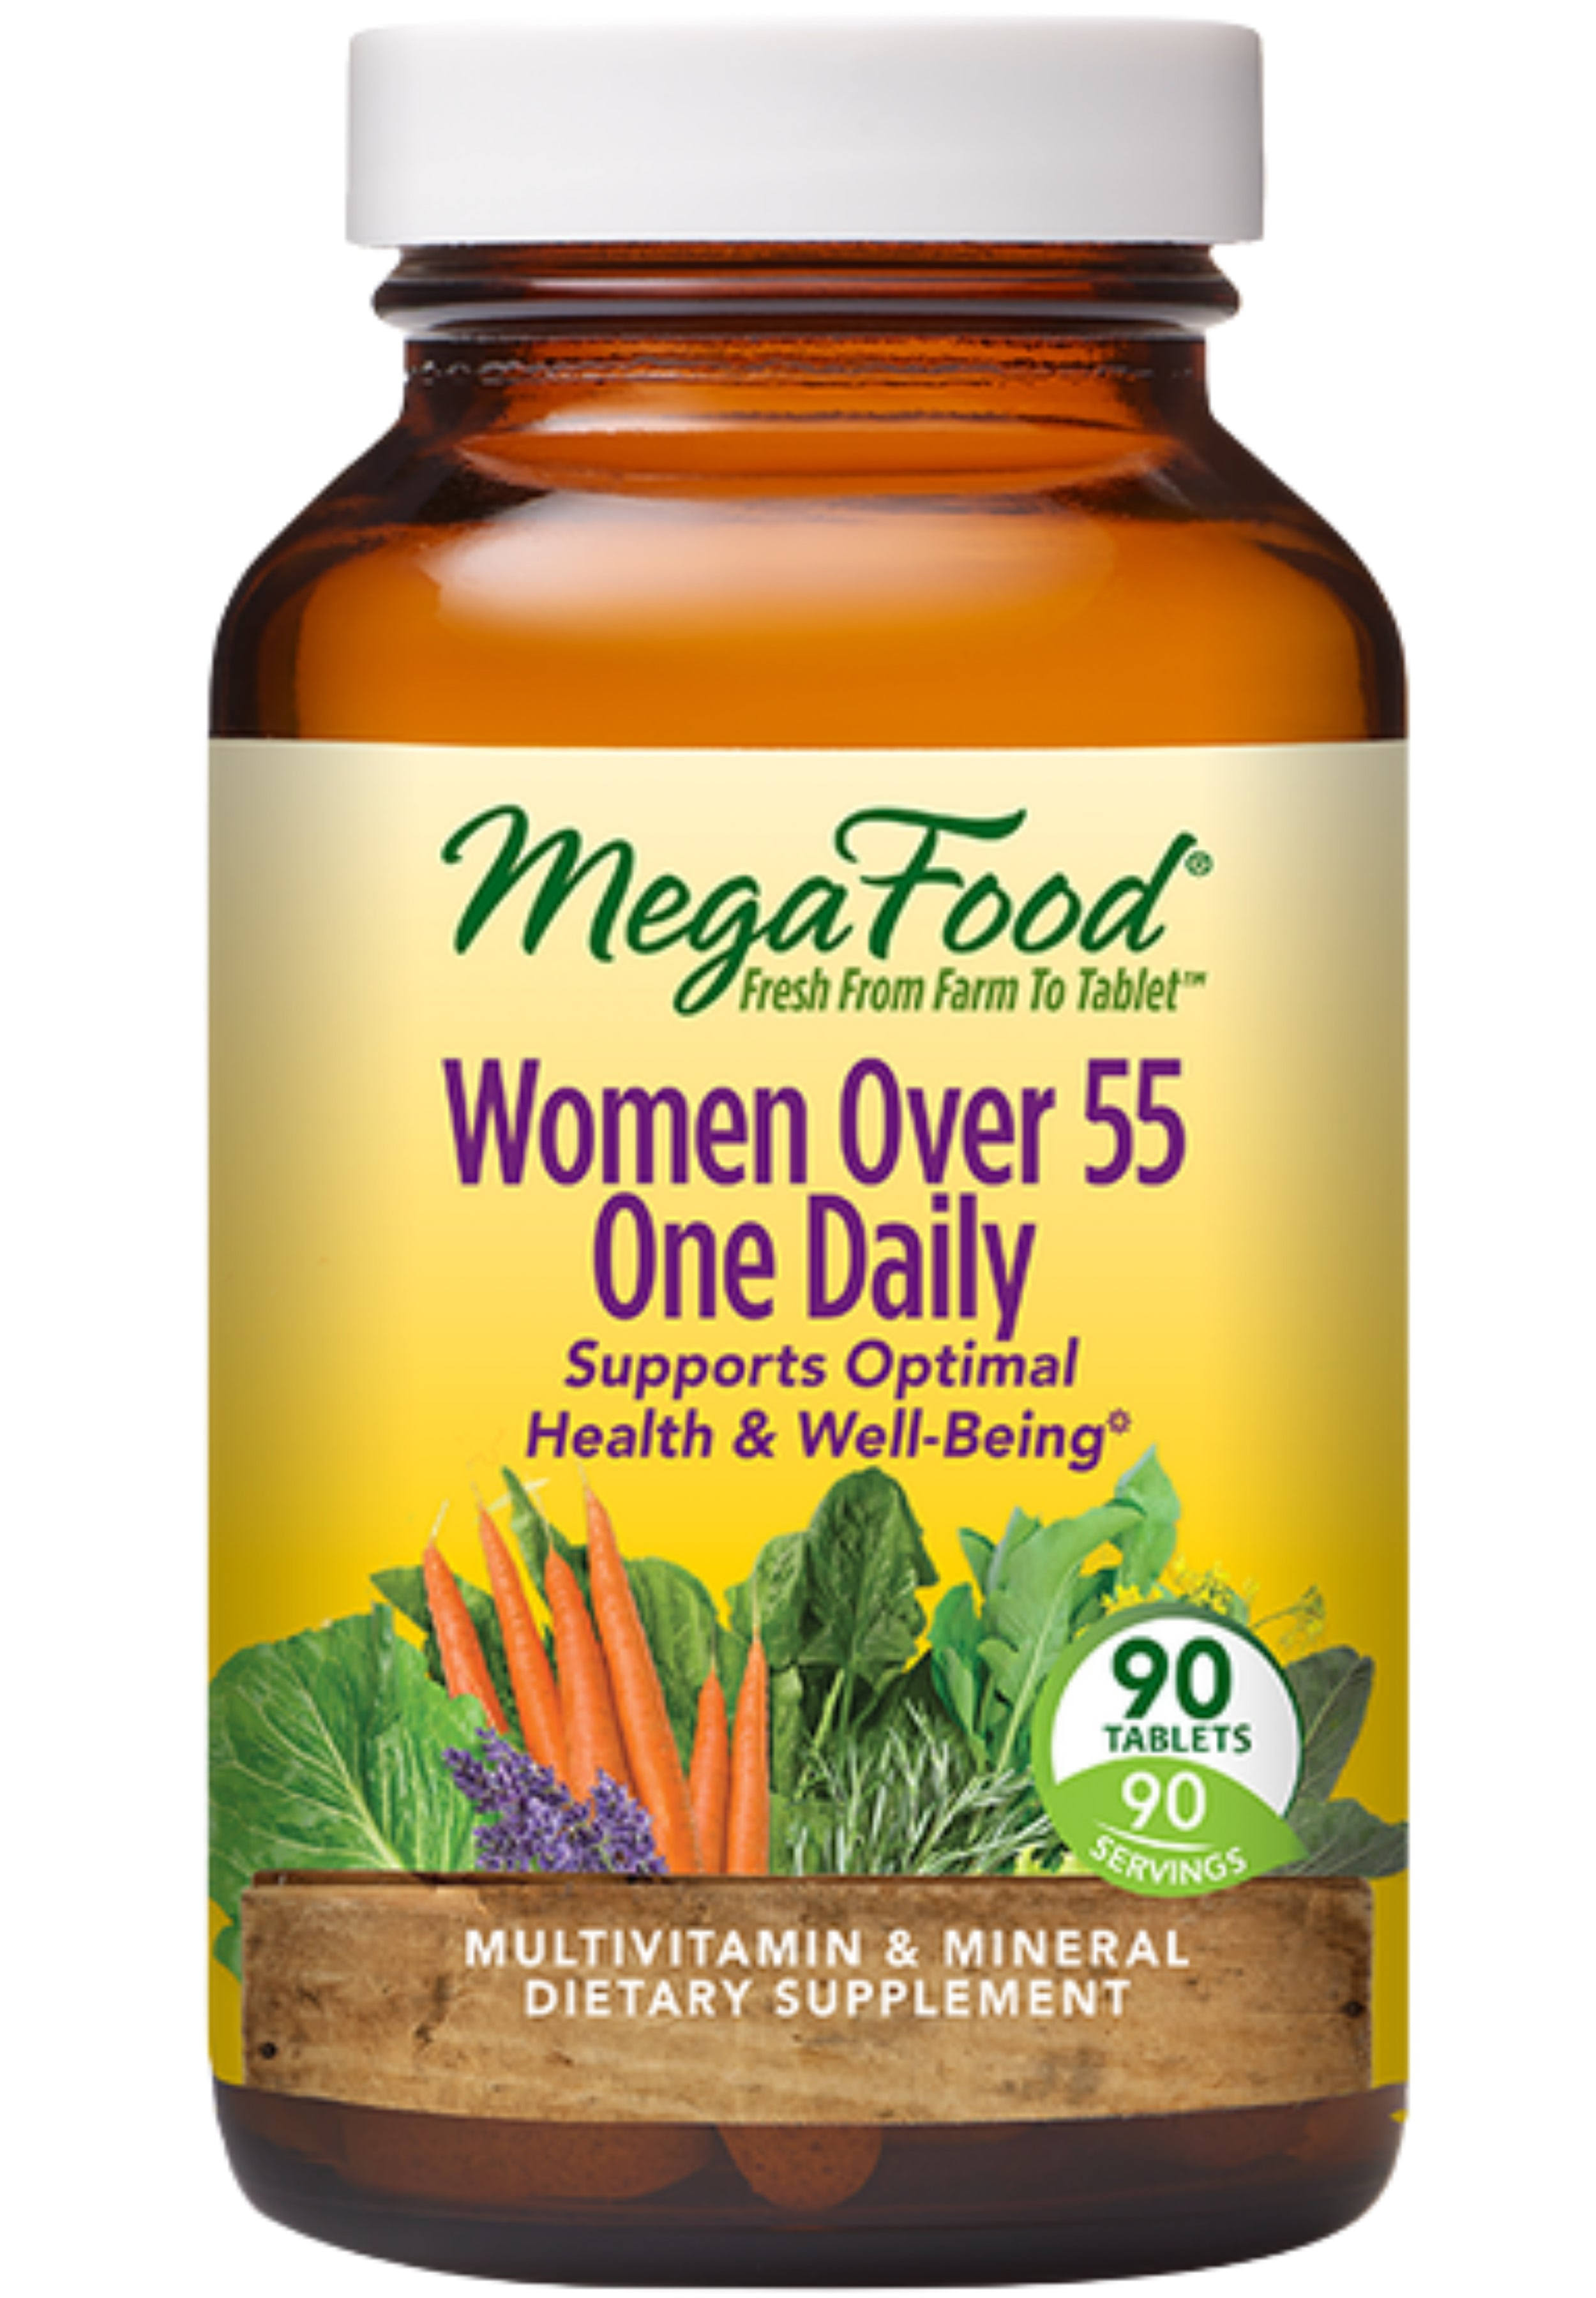 MegaFood - Women Over 55 One Daily - 90 Tablets